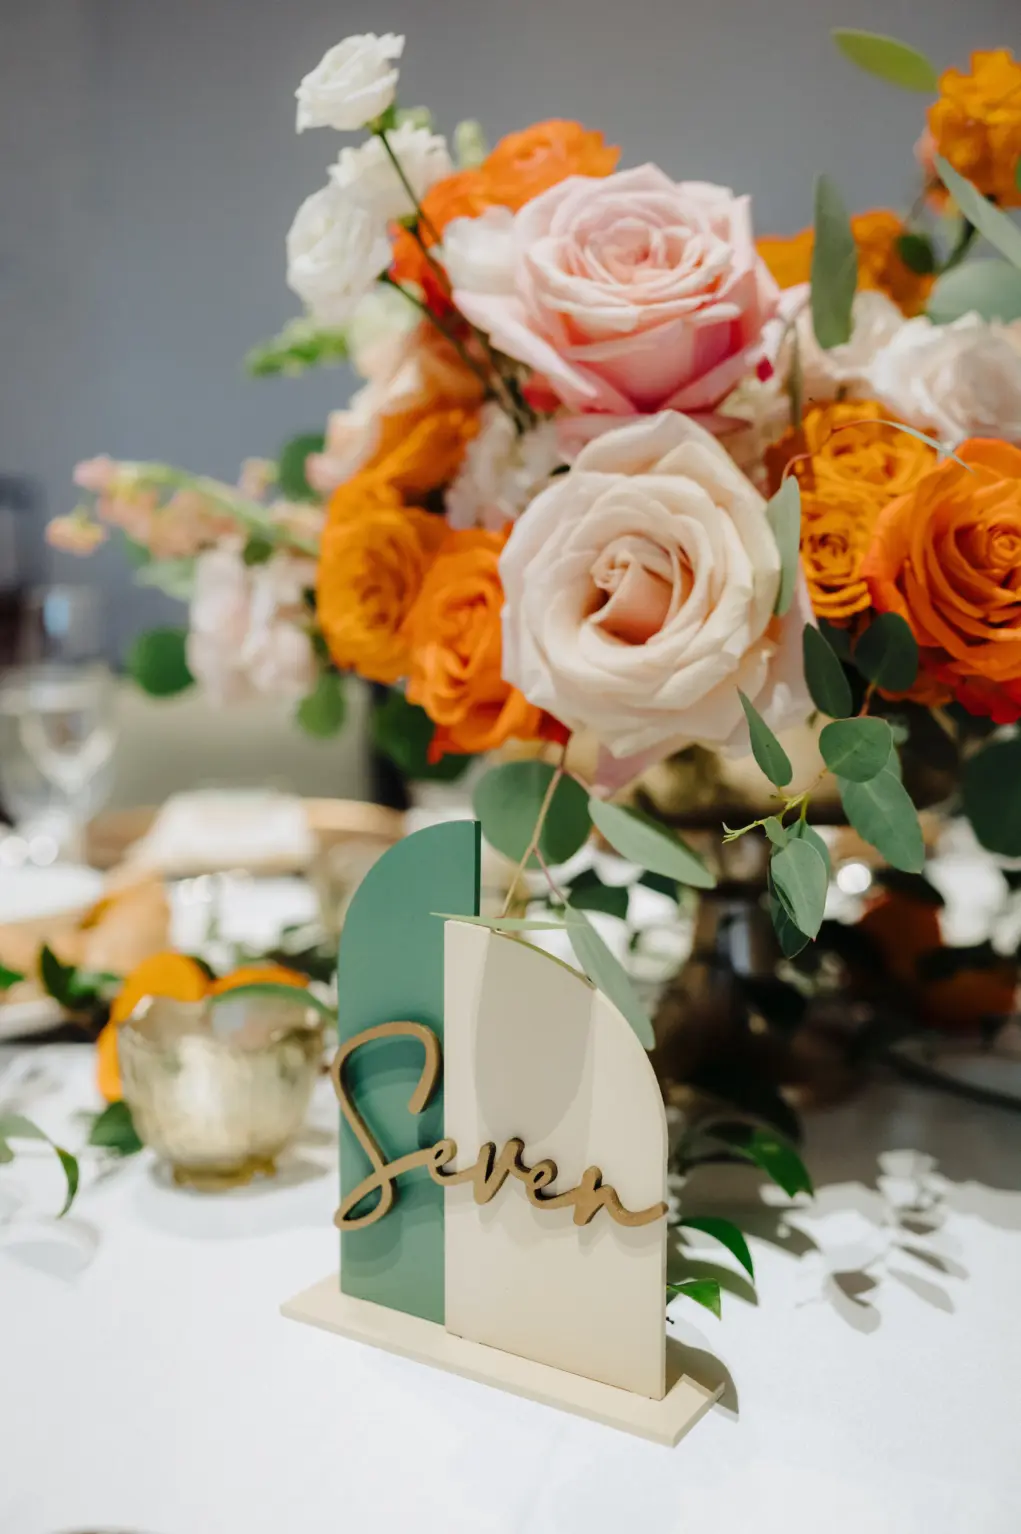 Modern Green and Cream Half Arch Wedding Reception Table Number Ideas | Pink and Orange Rose Centerpiece Inspiration